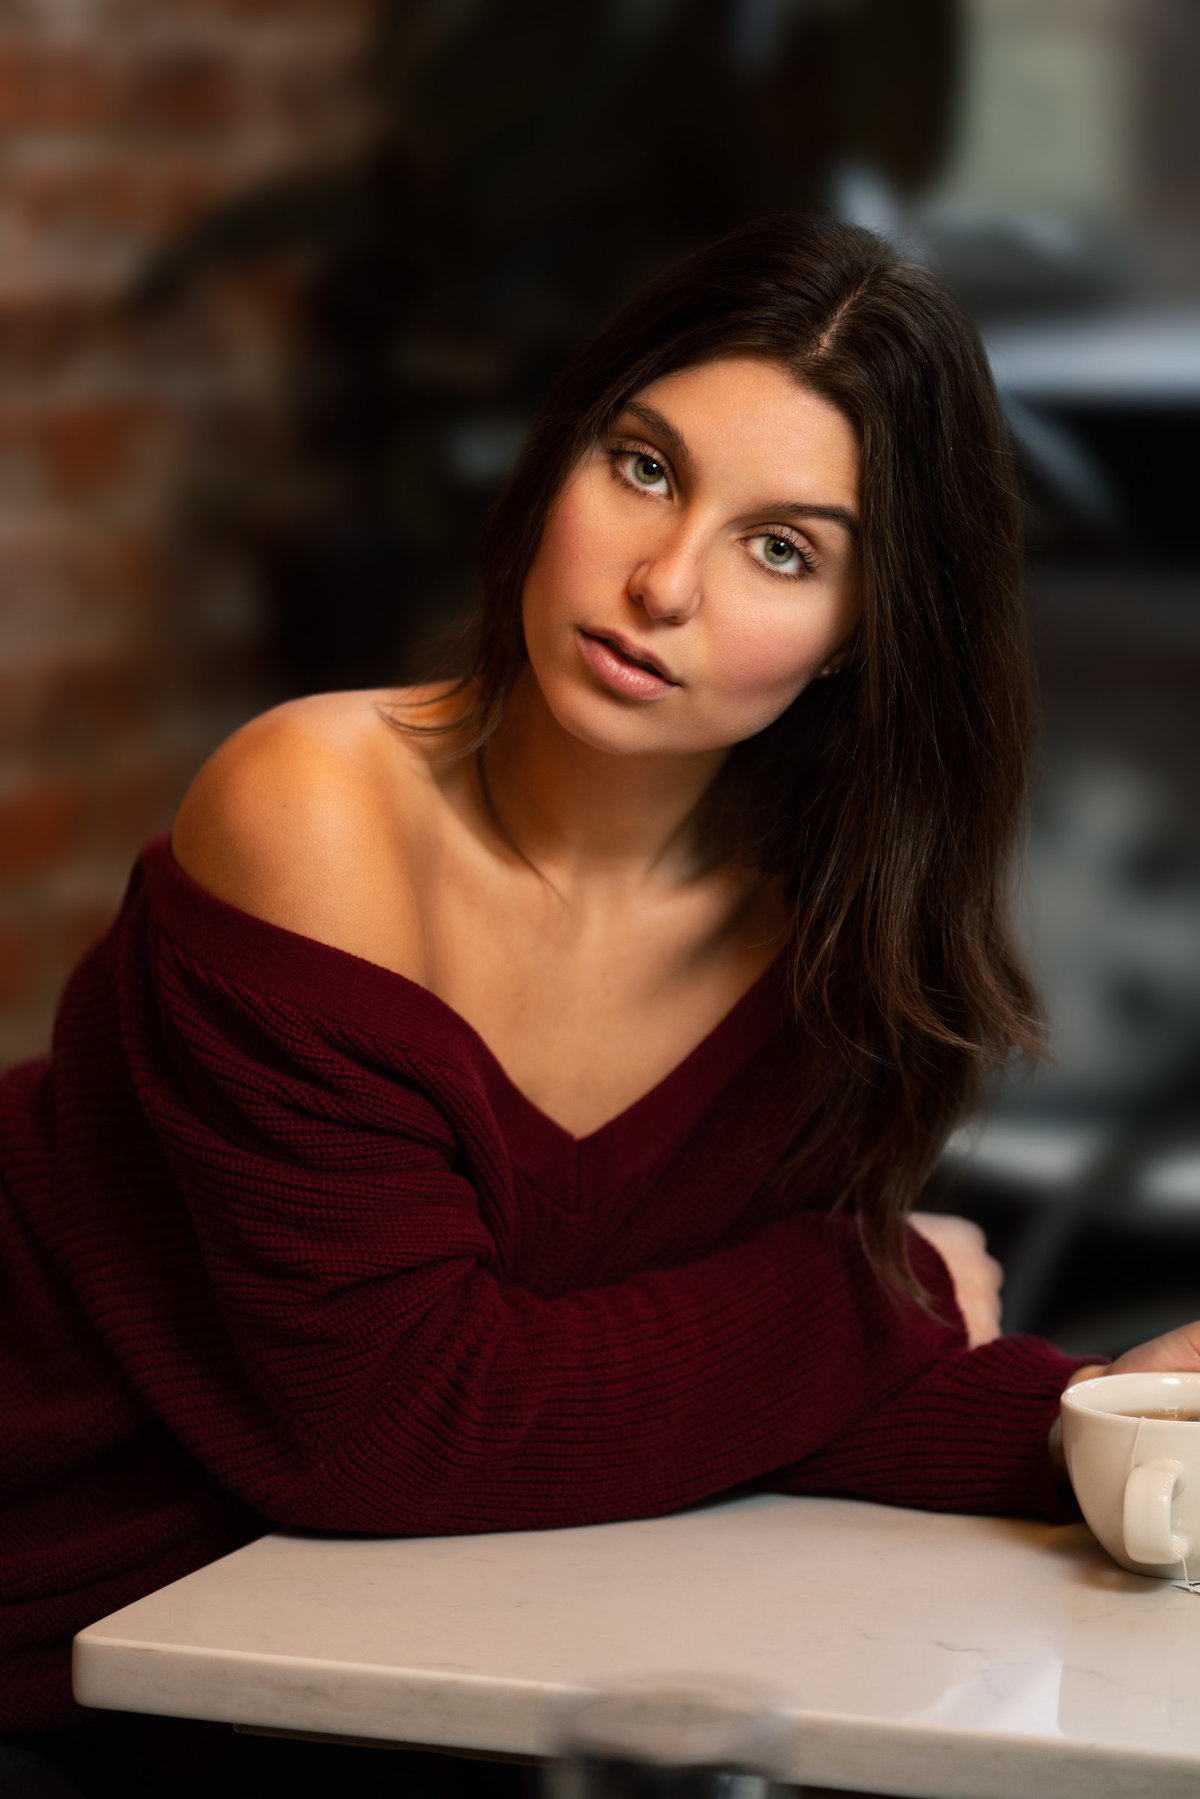 PORTRAIT OF A GIRL IN A COFFEE SHOP